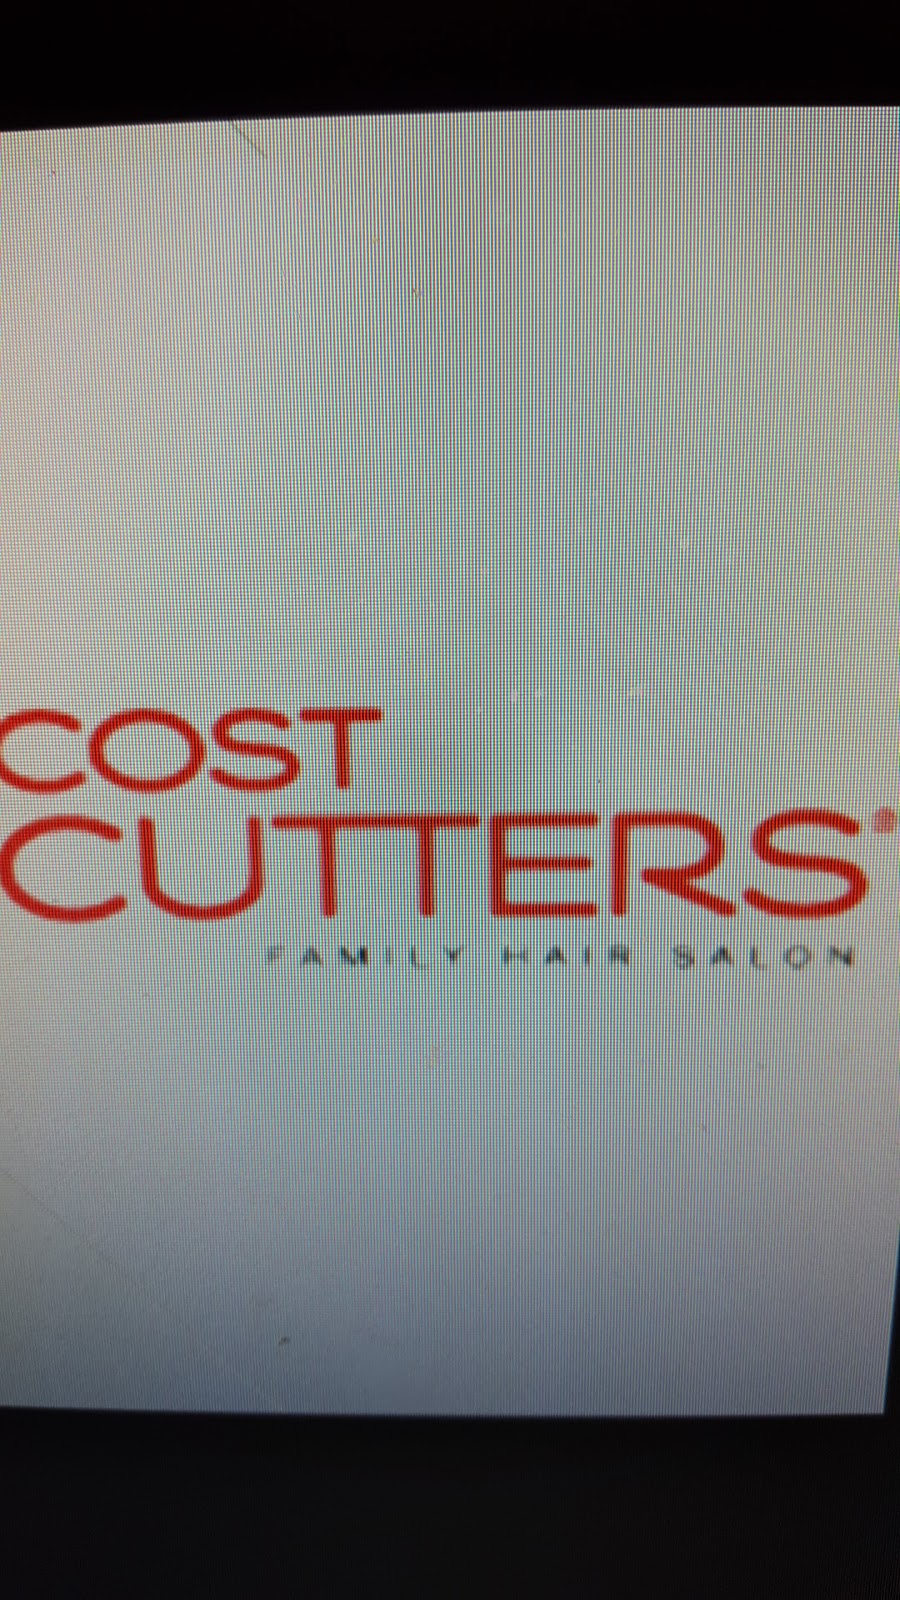 Cost Cutters | 100 Main St N, Southbury, CT 06488 | Phone: (203) 267-7117